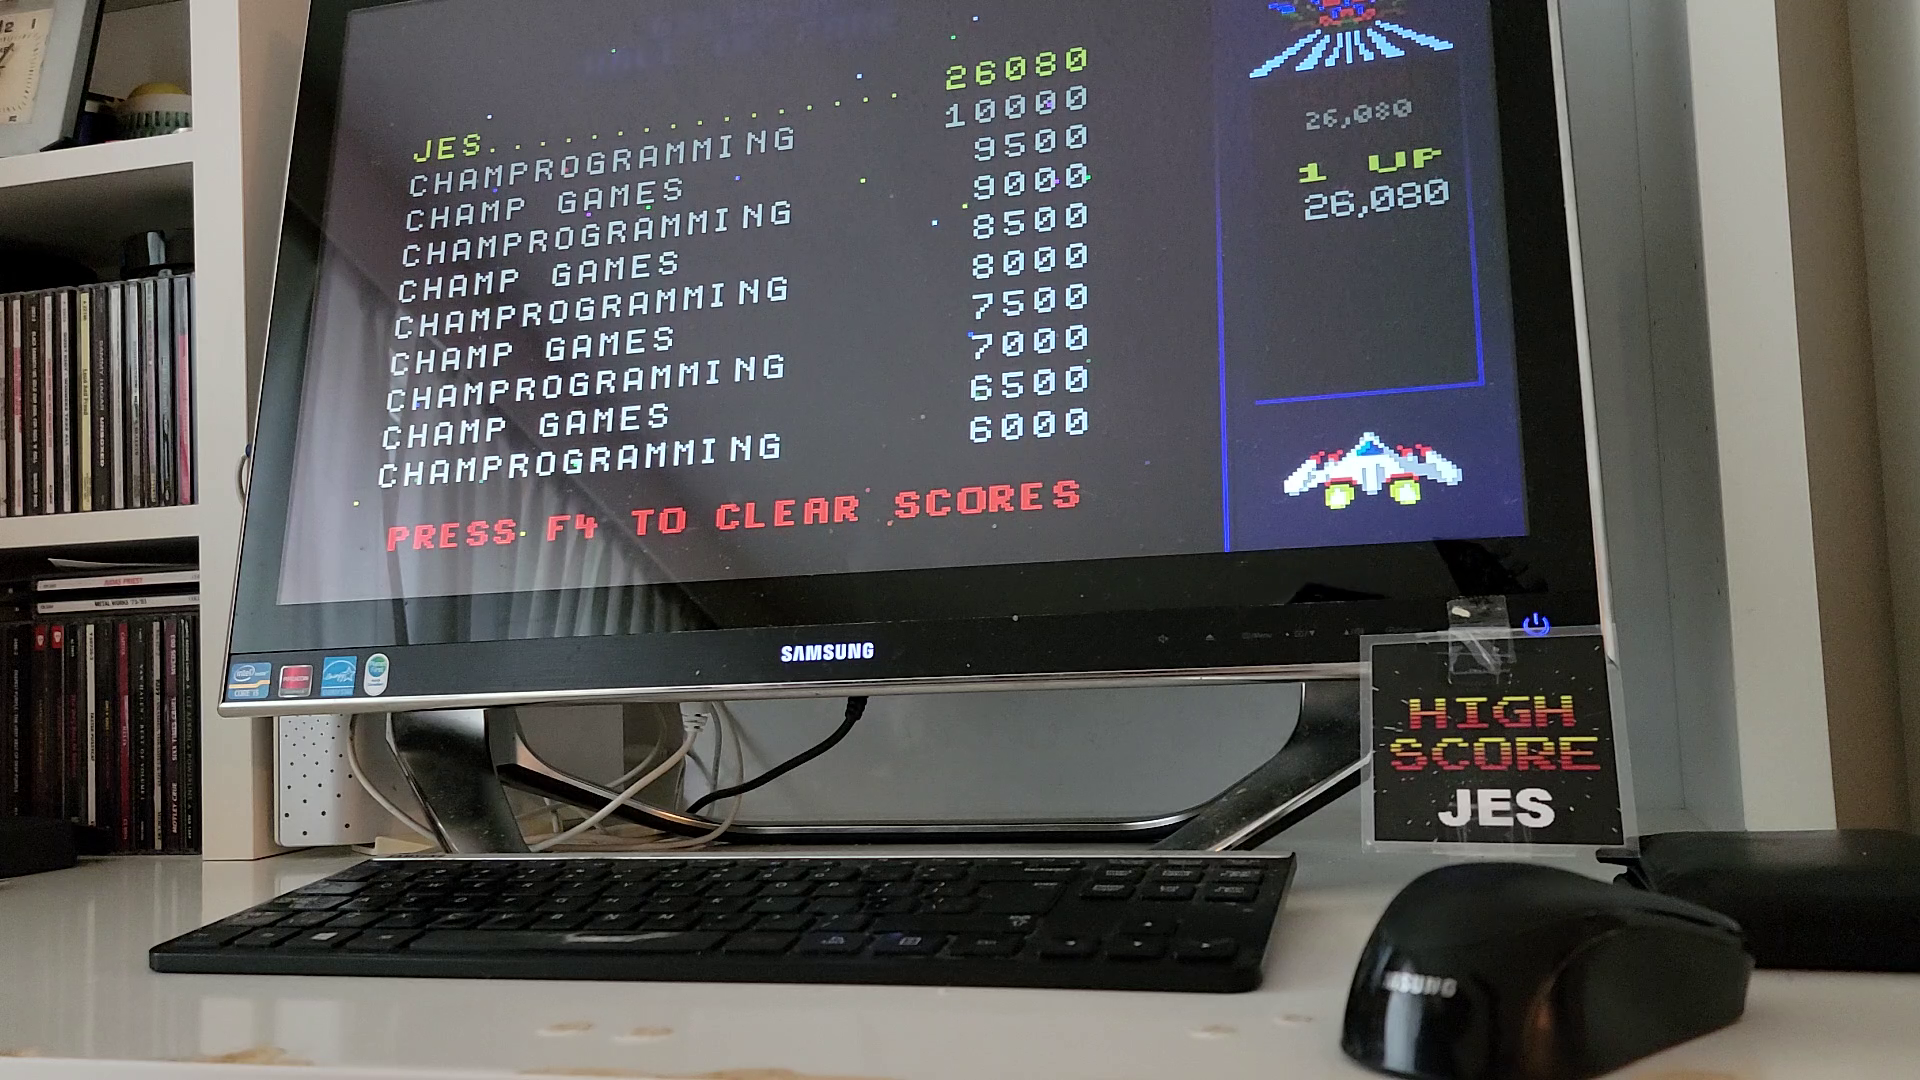 JES: Champ Galagon: Classic / Arcade (PC Emulated / DOSBox) 26,080 points on 2021-04-21 17:33:42